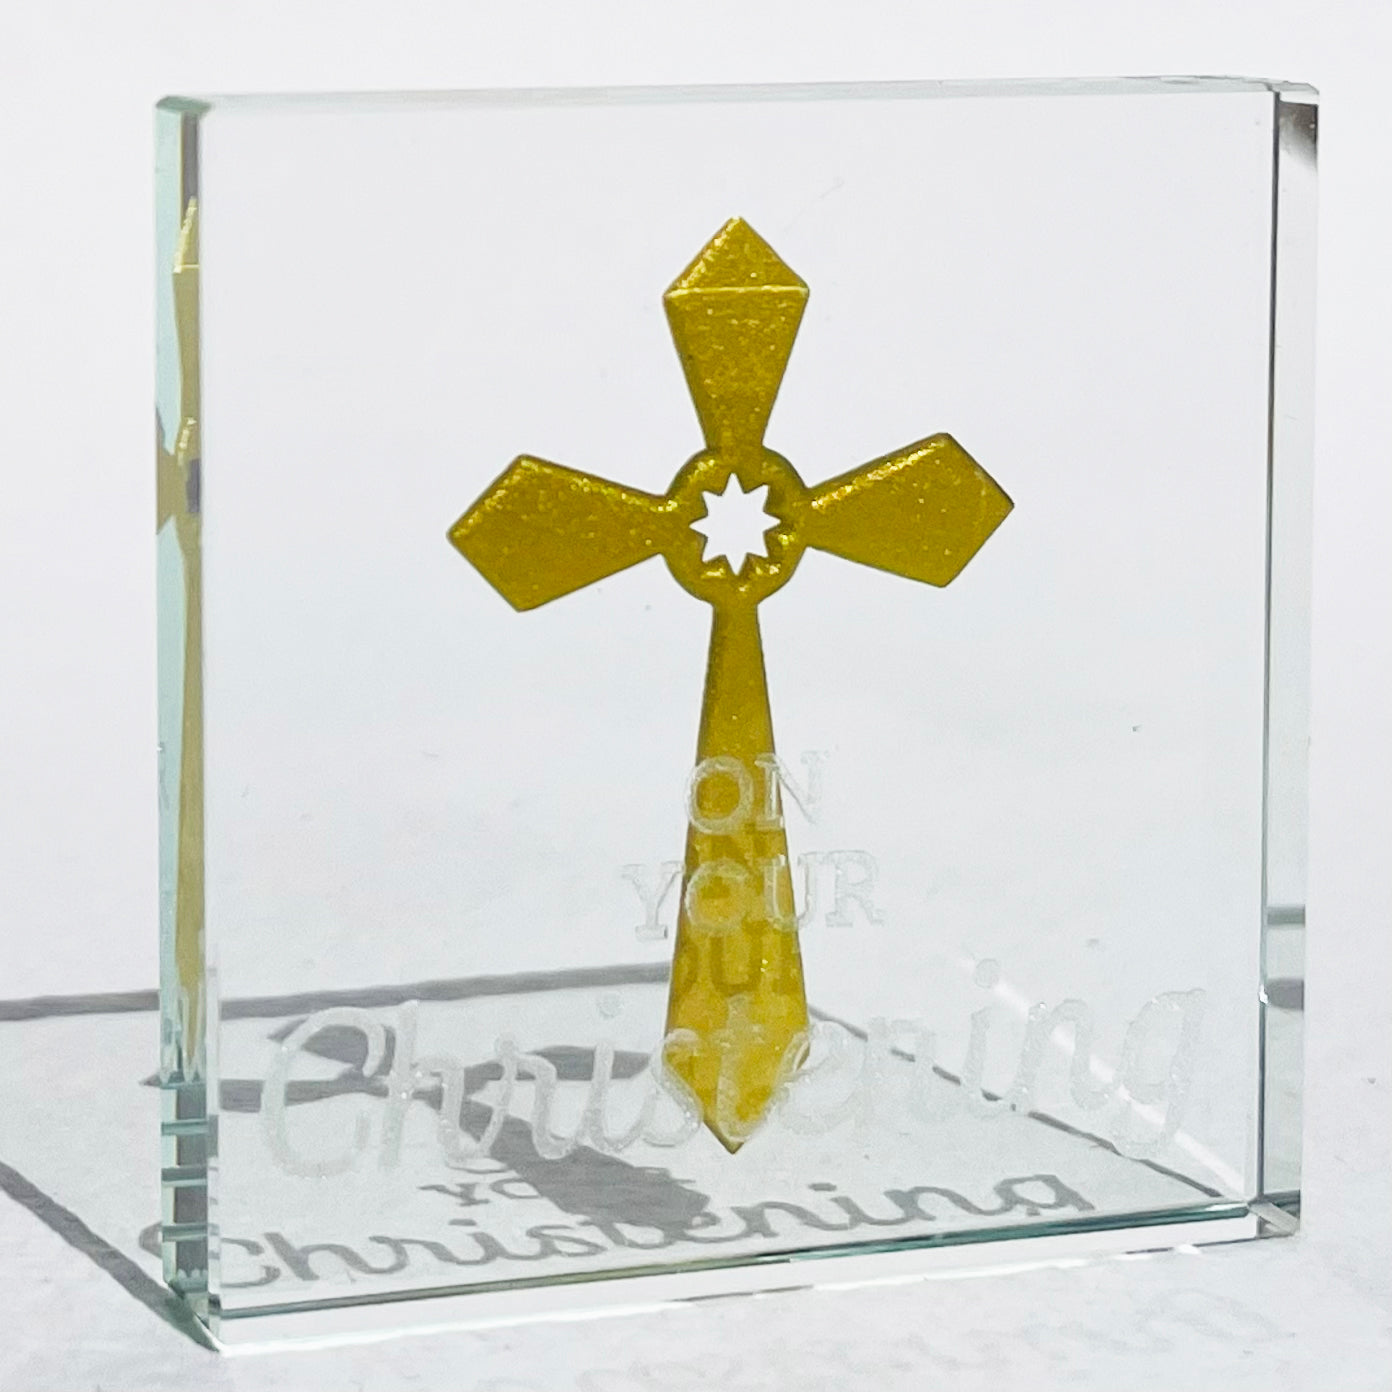 Mini Token Christening Cross - 2 pieces only